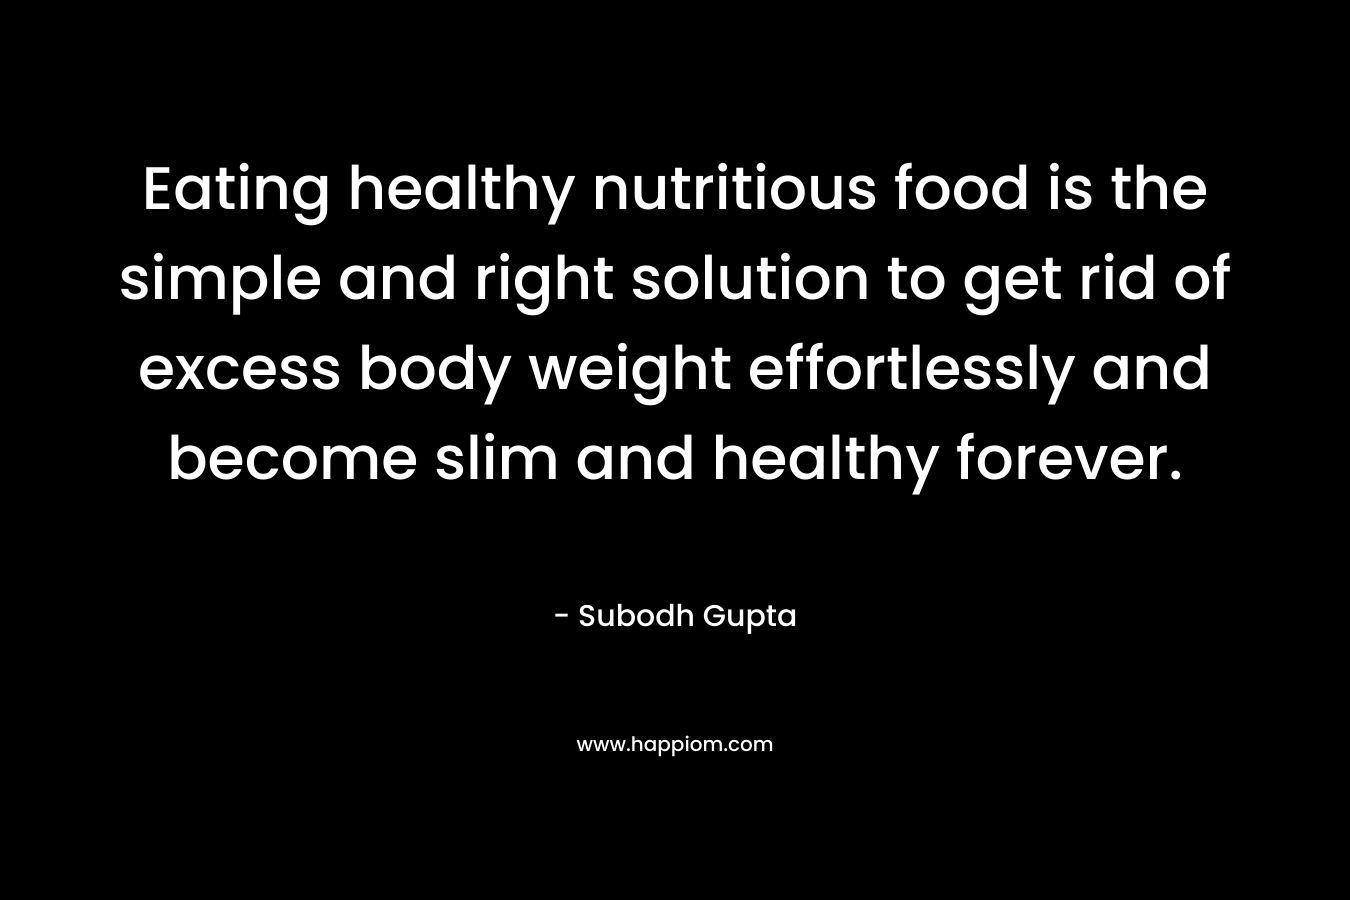 Eating healthy nutritious food is the simple and right solution to get rid of excess body weight effortlessly and become slim and healthy forever.